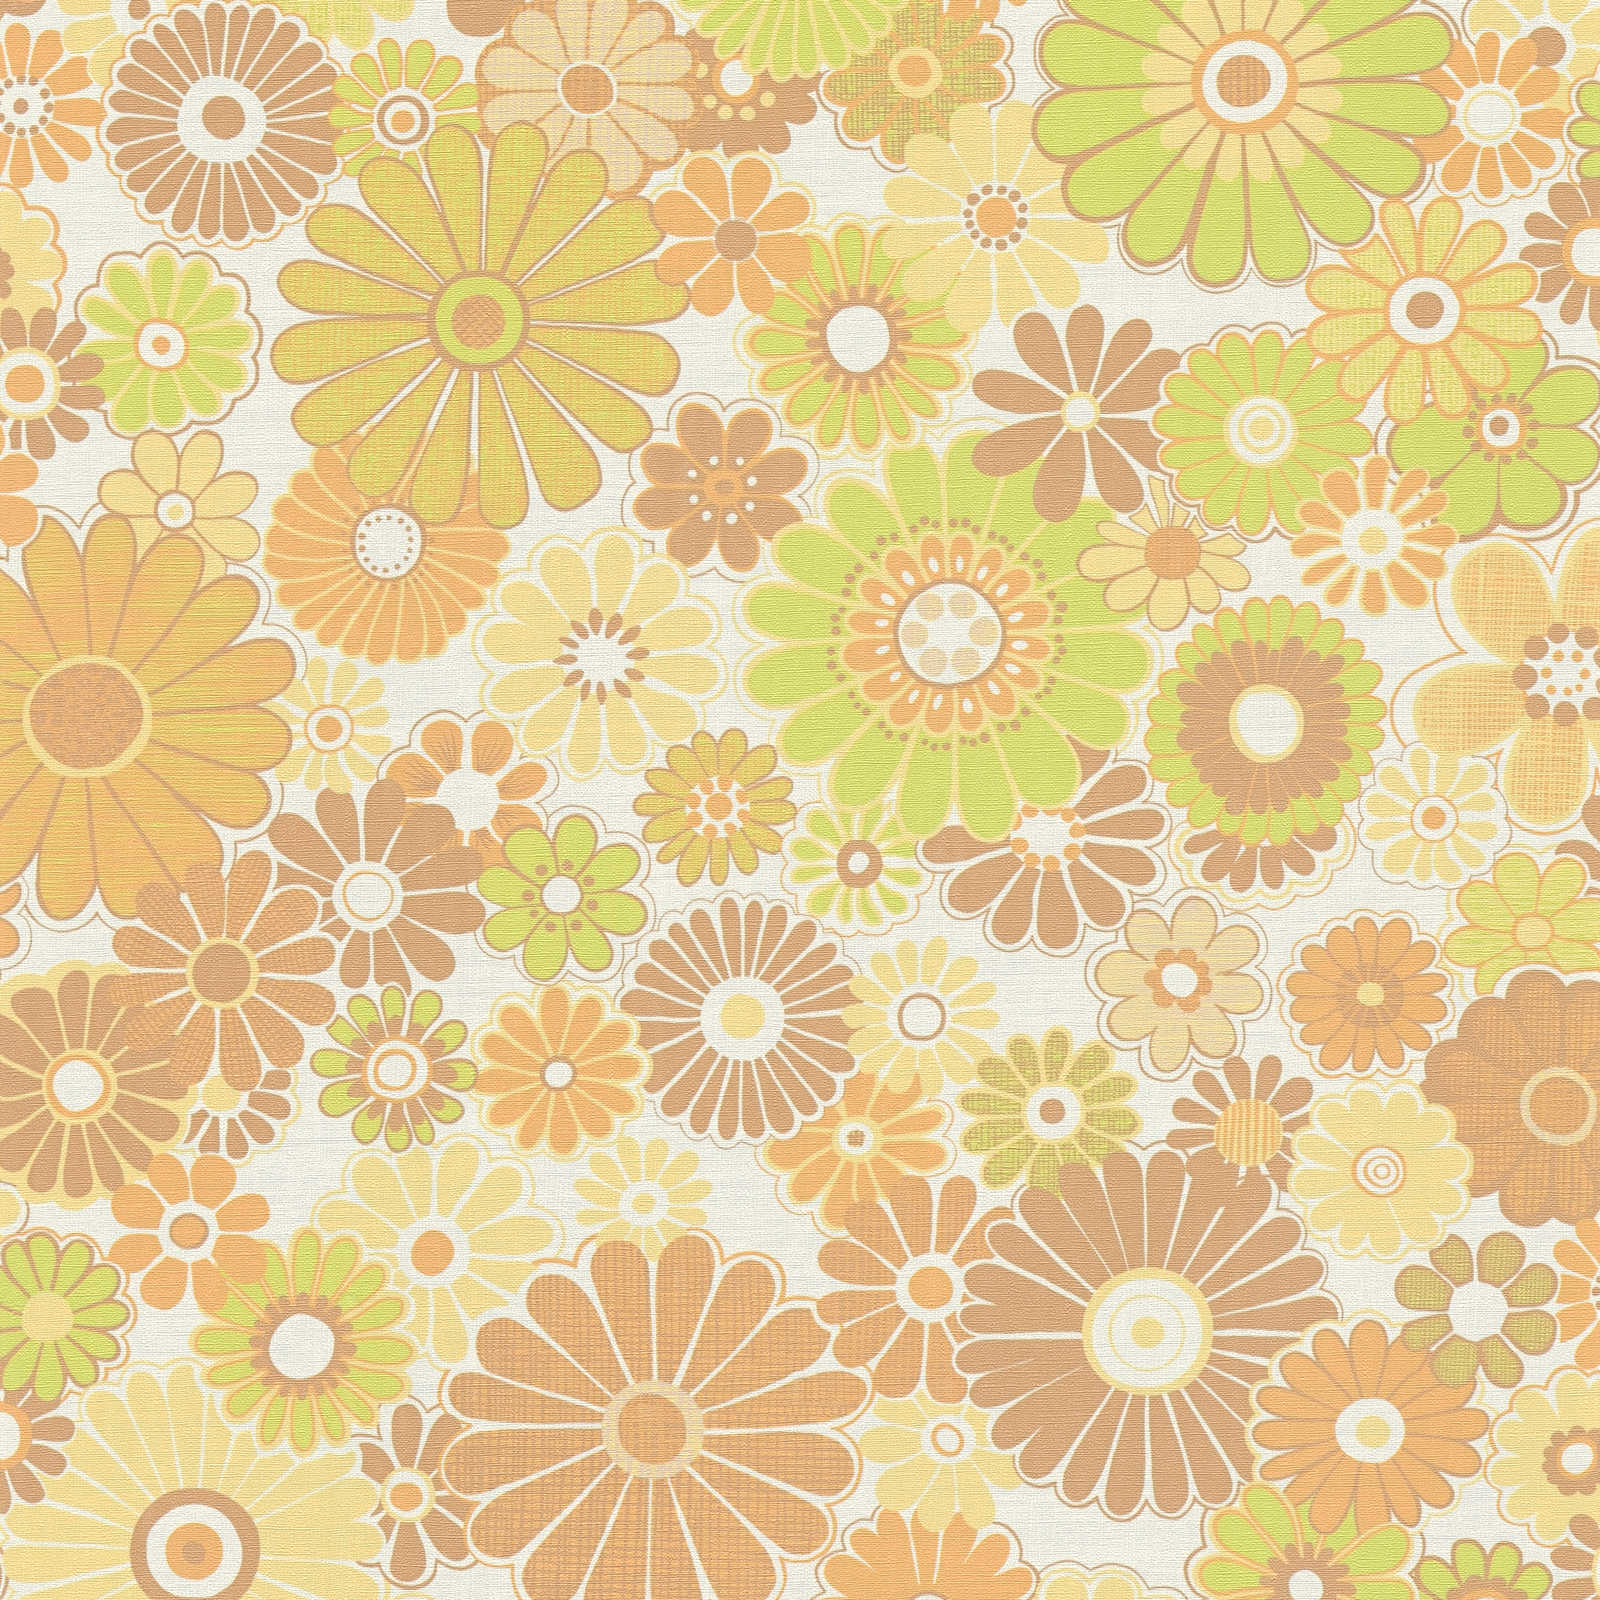 Floral retro wallpaper with light structure - yellow, green, brown
